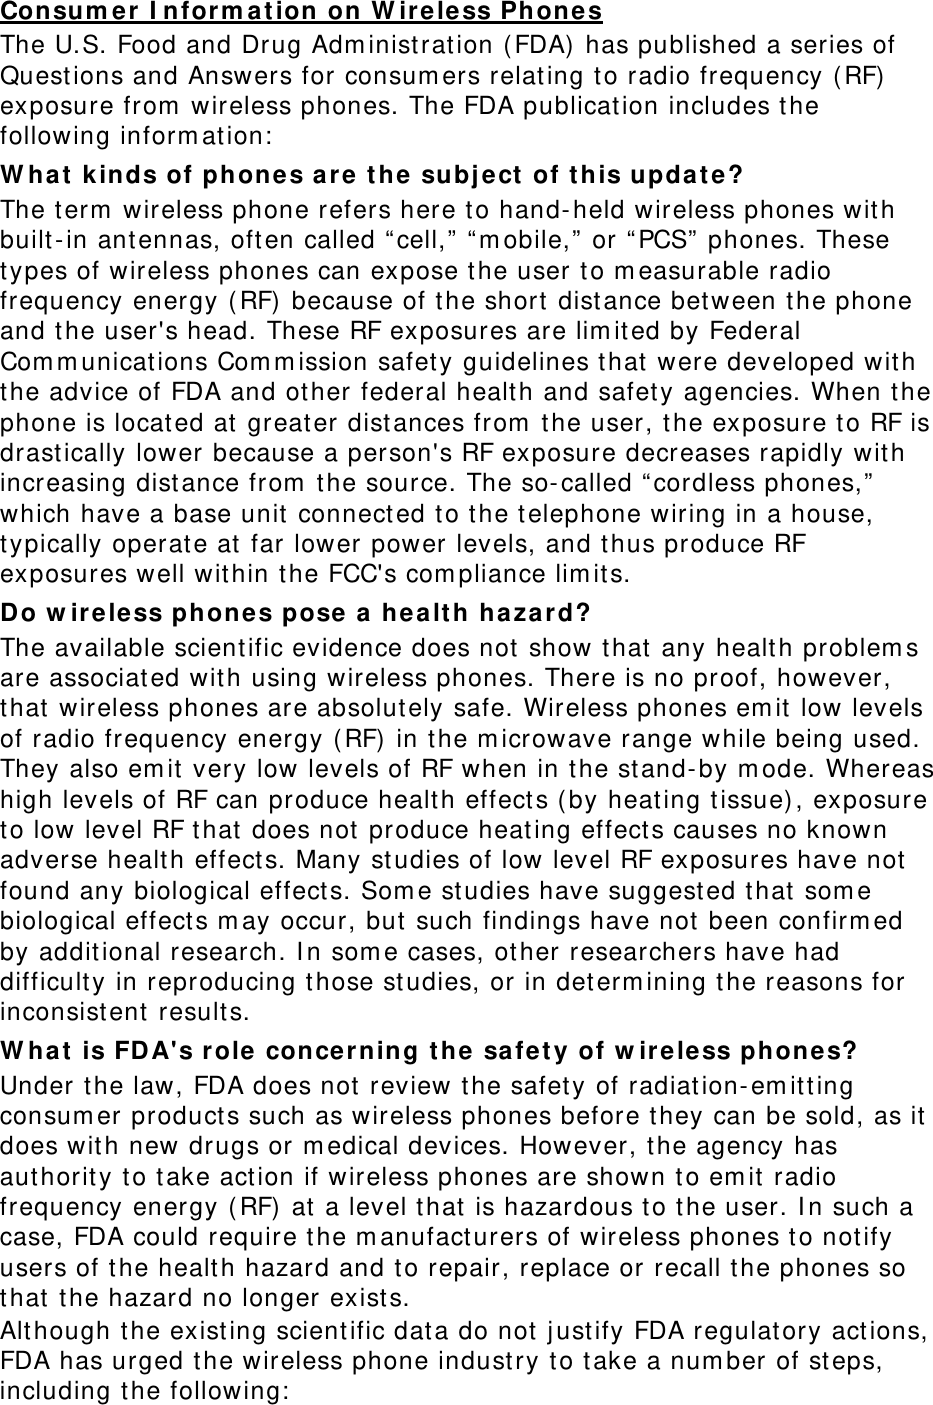 Consum e r  I nfor m at ion on W irele ss Phones The U.S. Food and Drug Adm inist ration ( FDA)  has published a series of Quest ions and Answers for consum ers relat ing to radio frequency ( RF)  exposure from  wireless phones. The FDA publicat ion includes the following inform at ion:  W hat  k inds of phones a r e  t he  subj ect  of t h is upda t e? The t erm  wireless phone refers here t o hand- held wireless phones wit h built - in ant ennas, oft en called “ cell,”  “ m obile,”  or “ PCS”  phones. These types of wireless phones can expose t he user t o m easurable radio frequency energy ( RF)  because of t he short  dist ance bet ween t he phone and t he user&apos;s head. These RF exposures are lim it ed by Federal Com m unications Com m ission safet y guidelines t hat  were developed with the advice of FDA and ot her federal healt h and safet y agencies. When t he phone is locat ed at greater distances from  t he user, the exposure t o RF is drast ically lower because a person&apos;s RF exposure decreases rapidly wit h increasing dist ance from  t he source. The so- called “ cordless phones,”  which have a base unit  connected t o the telephone wiring in a house, typically operat e at far lower power levels, and t hus produce RF exposures well within t he FCC&apos;s com pliance lim it s. Do w ireless phones pose  a  hea lt h haza r d? The available scient ific evidence does not show that any healt h problem s are associat ed wit h using wireless phones. There is no proof, however, that  wireless phones are absolut ely safe. Wireless phones em it low levels of radio frequency energy ( RF)  in t he m icrowave range while being used. They also em it  very low levels of RF when in t he stand- by m ode. Whereas high levels of RF can produce healt h effects ( by heat ing tissue) , exposure to low level RF t hat  does not  produce heat ing effect s causes no known adverse healt h effect s. Many studies of low level RF exposures have not  found any biological effects. Som e studies have suggest ed t hat  som e biological effect s m ay occur, but  such findings have not  been confirm ed by additional research. I n som e cases, ot her researchers have had difficult y in reproducing t hose st udies, or in det erm ining t he reasons for inconsist ent result s. W hat  is FDA&apos;s role conce r ning t he safet y of w ir e le ss phon es? Under t he law, FDA does not  review t he safet y of radiation- em it t ing consum er products such as wireless phones before they can be sold, as it does with new drugs or m edical devices. However, t he agency has aut horit y t o t ake action if wireless phones are shown to em it  radio frequency energy ( RF)  at  a level t hat  is hazardous t o t he user. I n such a case, FDA could require t he m anufacturers of wireless phones t o not ify users of t he health hazard and t o repair, replace or recall t he phones so that  t he hazard no longer exists. Although t he exist ing scient ific data do not  j ustify FDA regulat ory actions, FDA has urged t he wireless phone industry t o t ake a num ber of st eps, including t he following:  